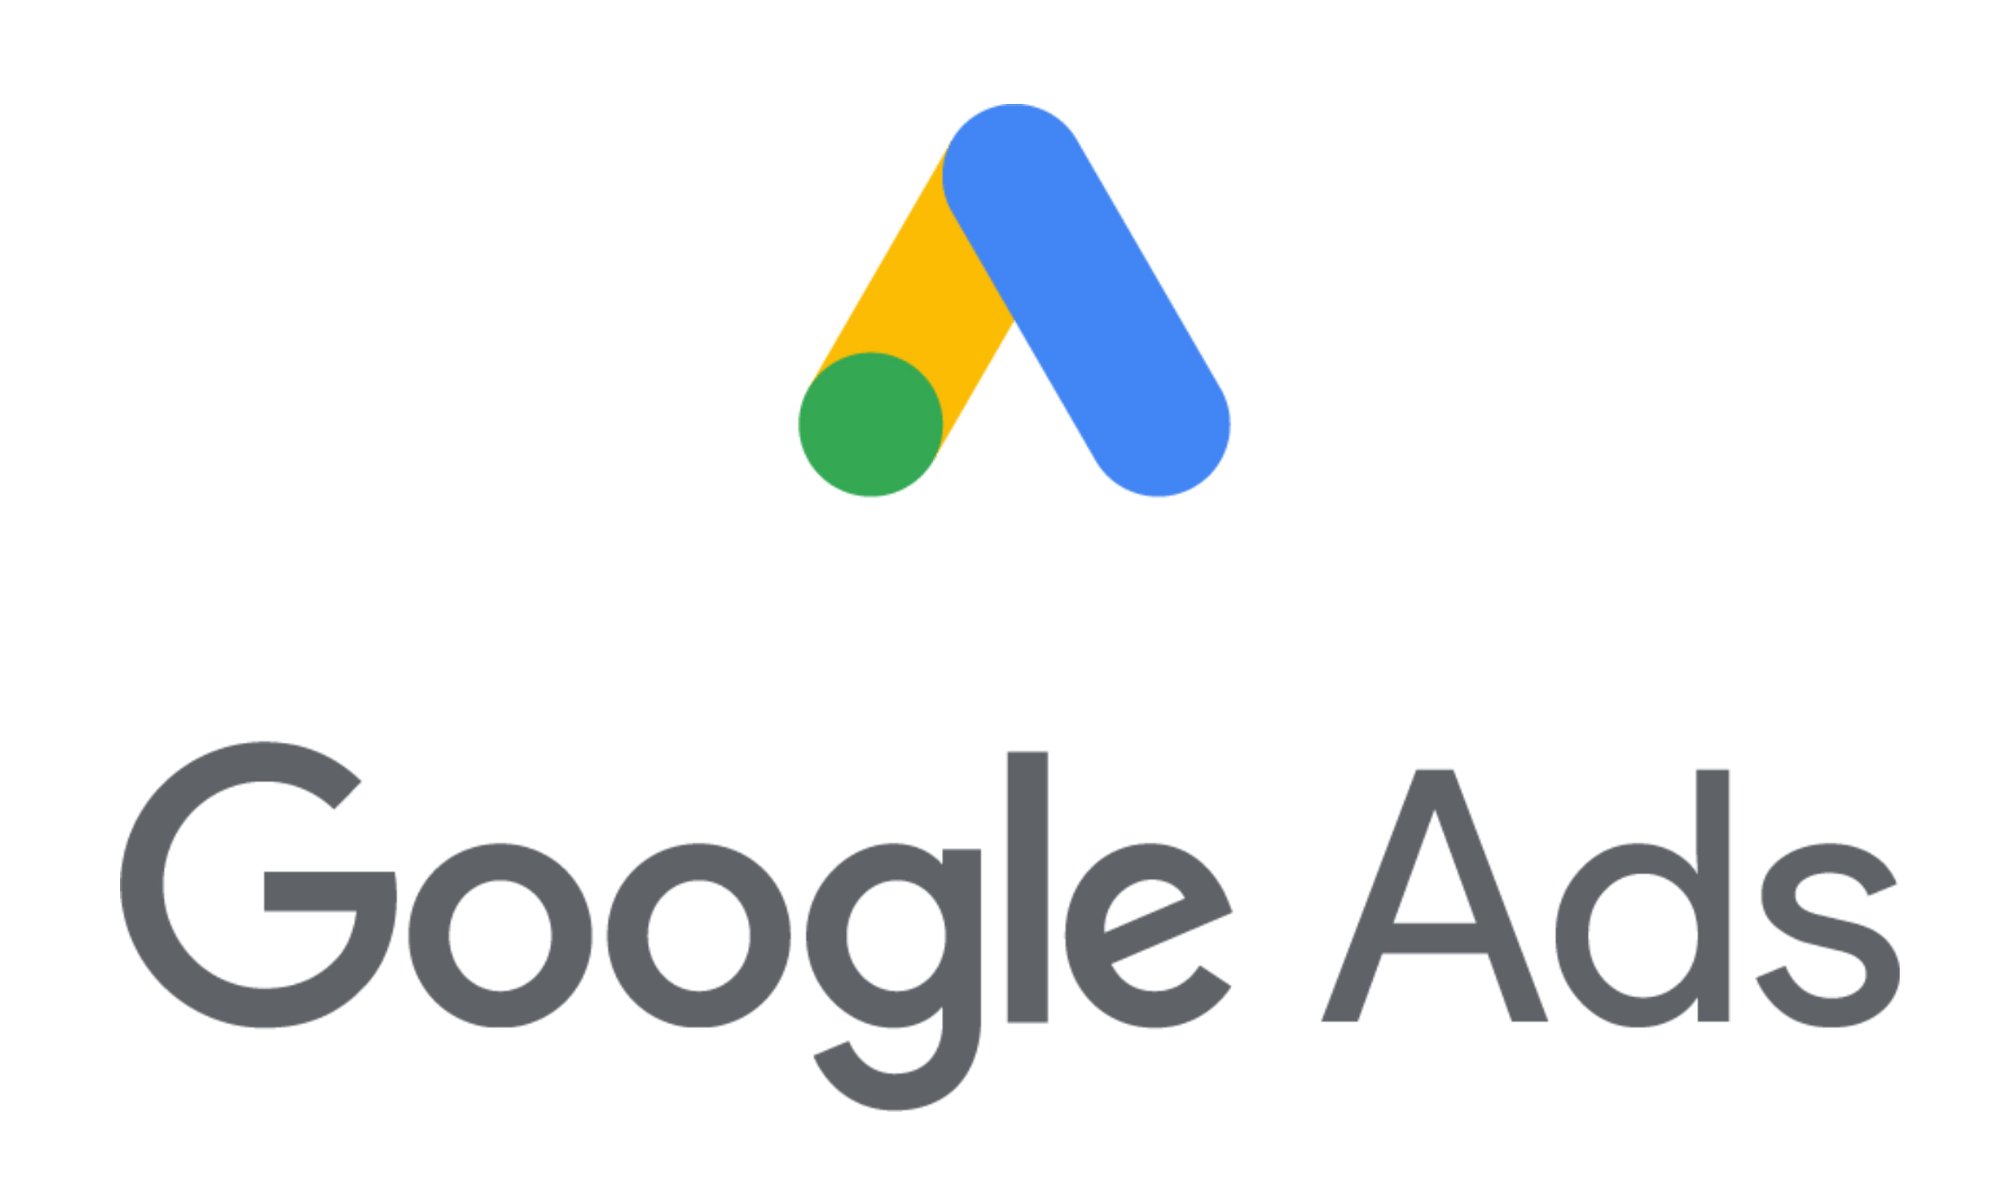 Easy conversion tracking with Google Ads.